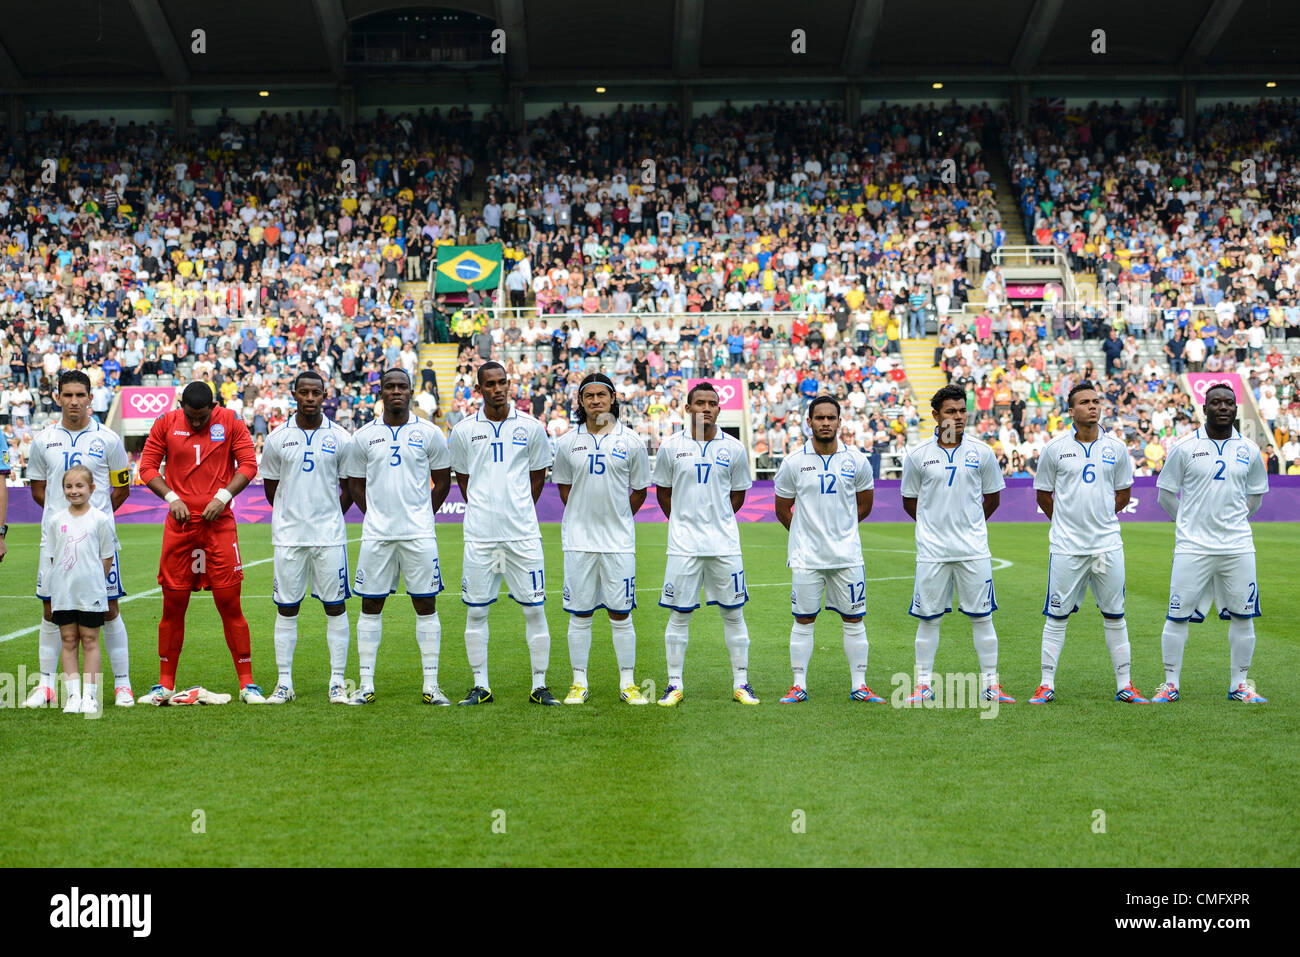 Newcastle, UK. Saturday 4th August 2012. Team Honduras before the Olympic Football Men's Quarter Final game between Brazil and Honduras from St James Park. Stock Photo